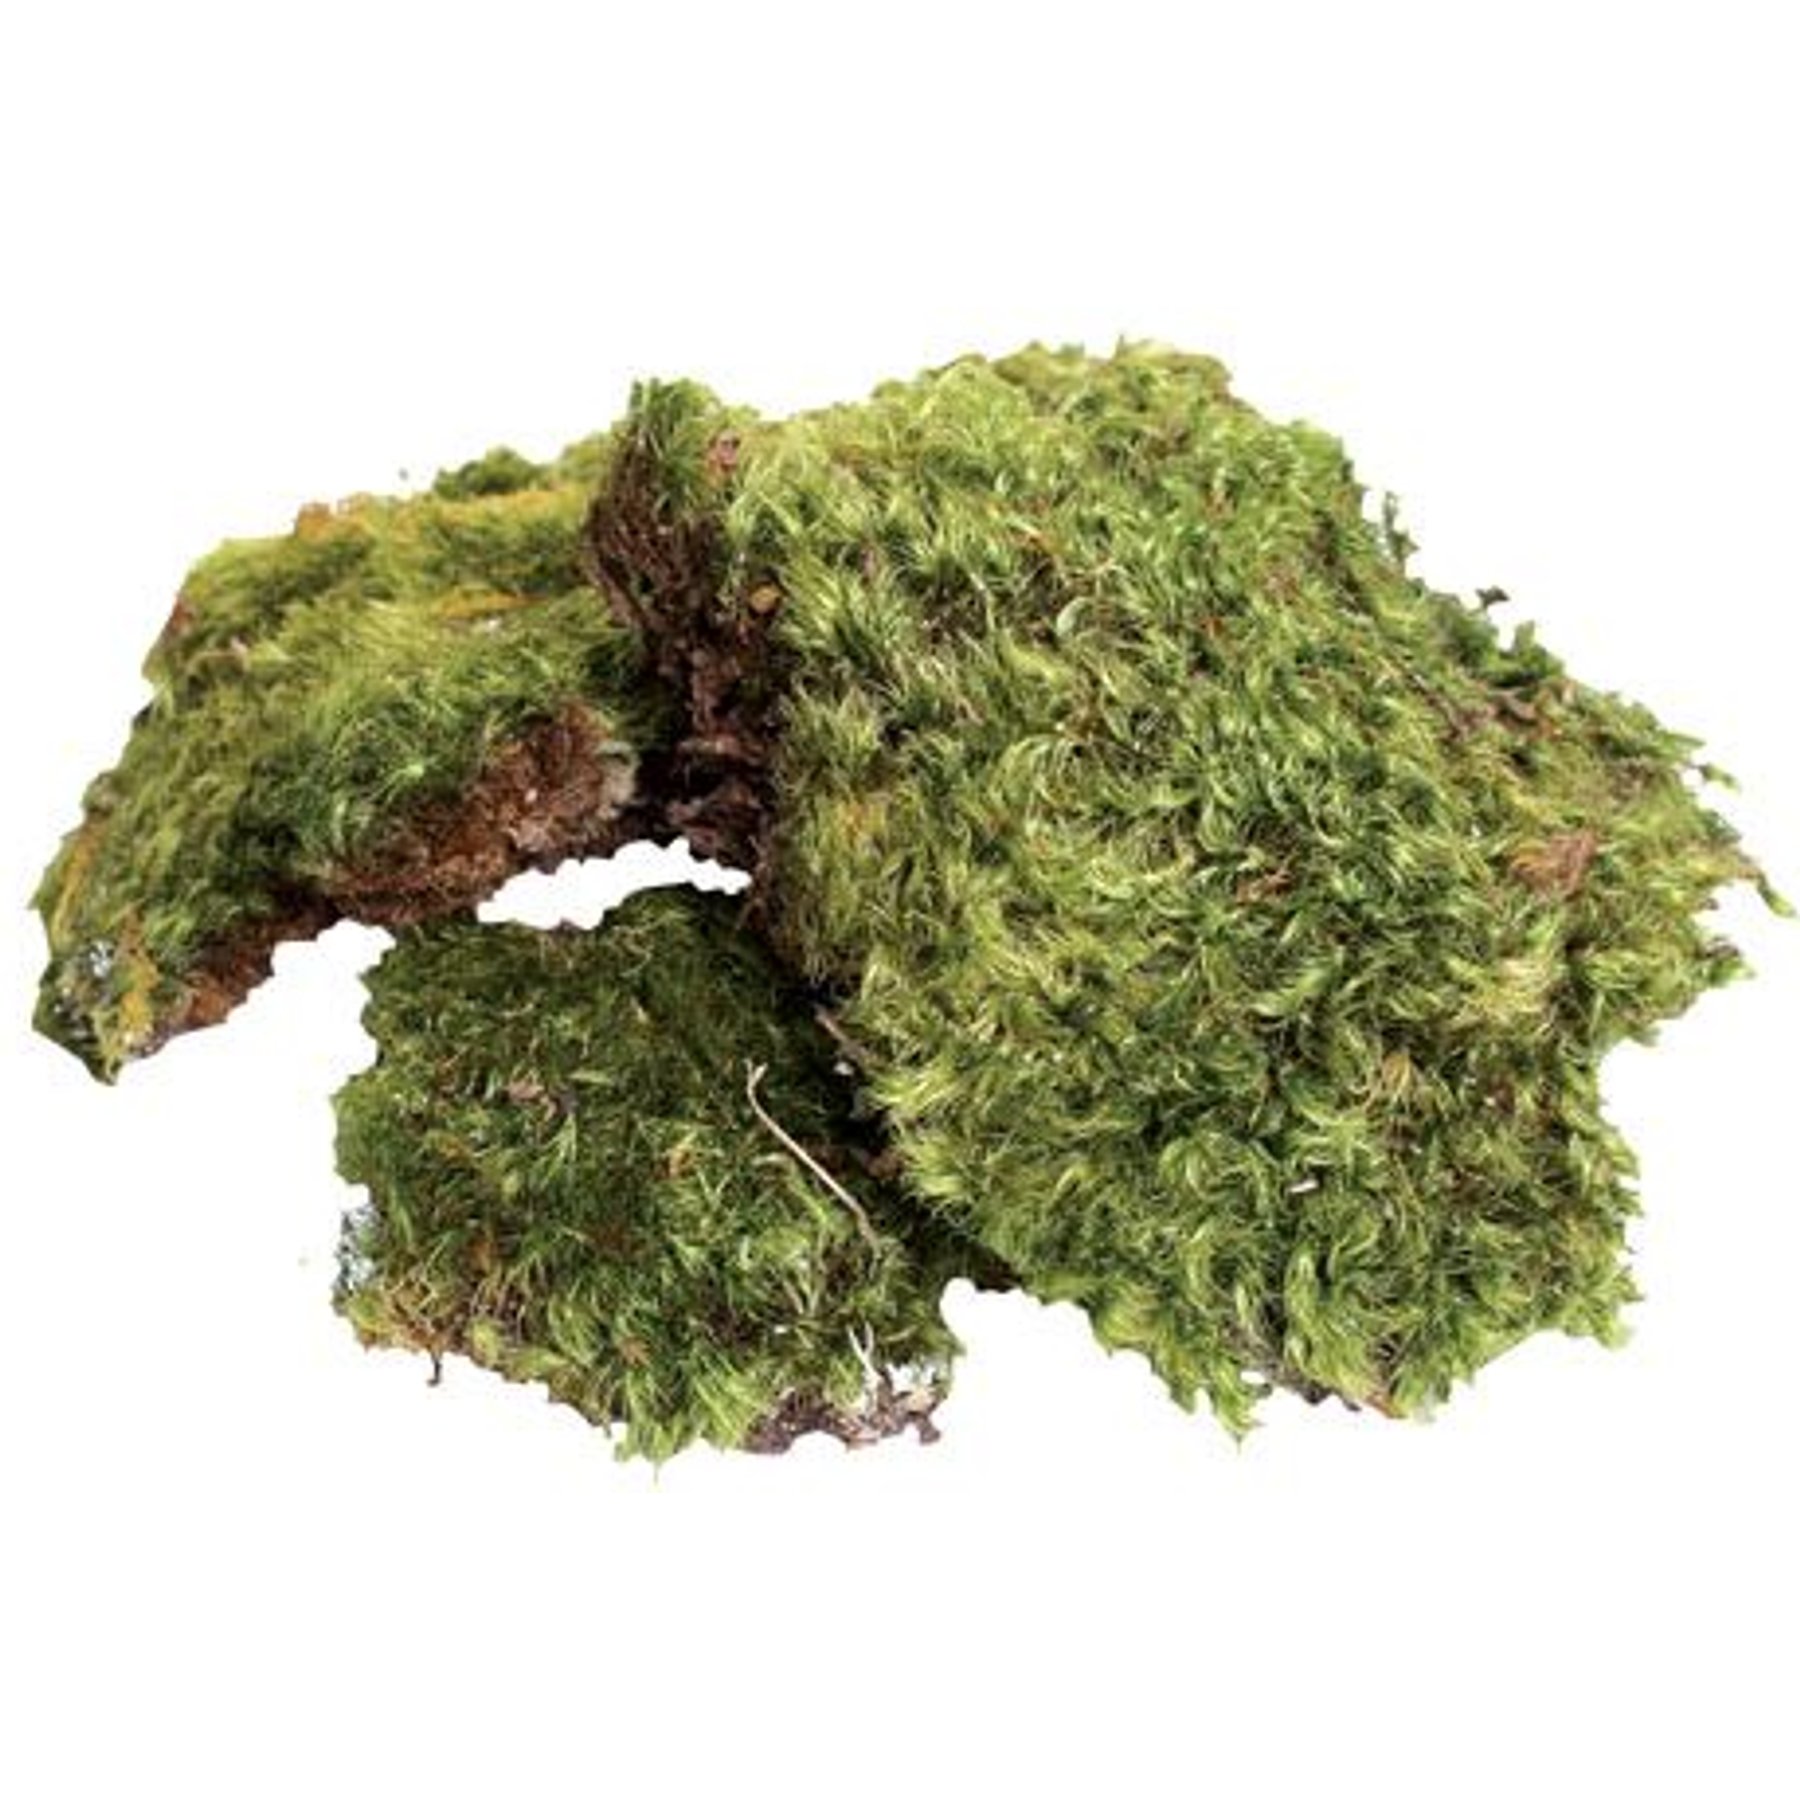 Zoo Med Frog Moss, 80 Cubic-Inches : Terrarium  